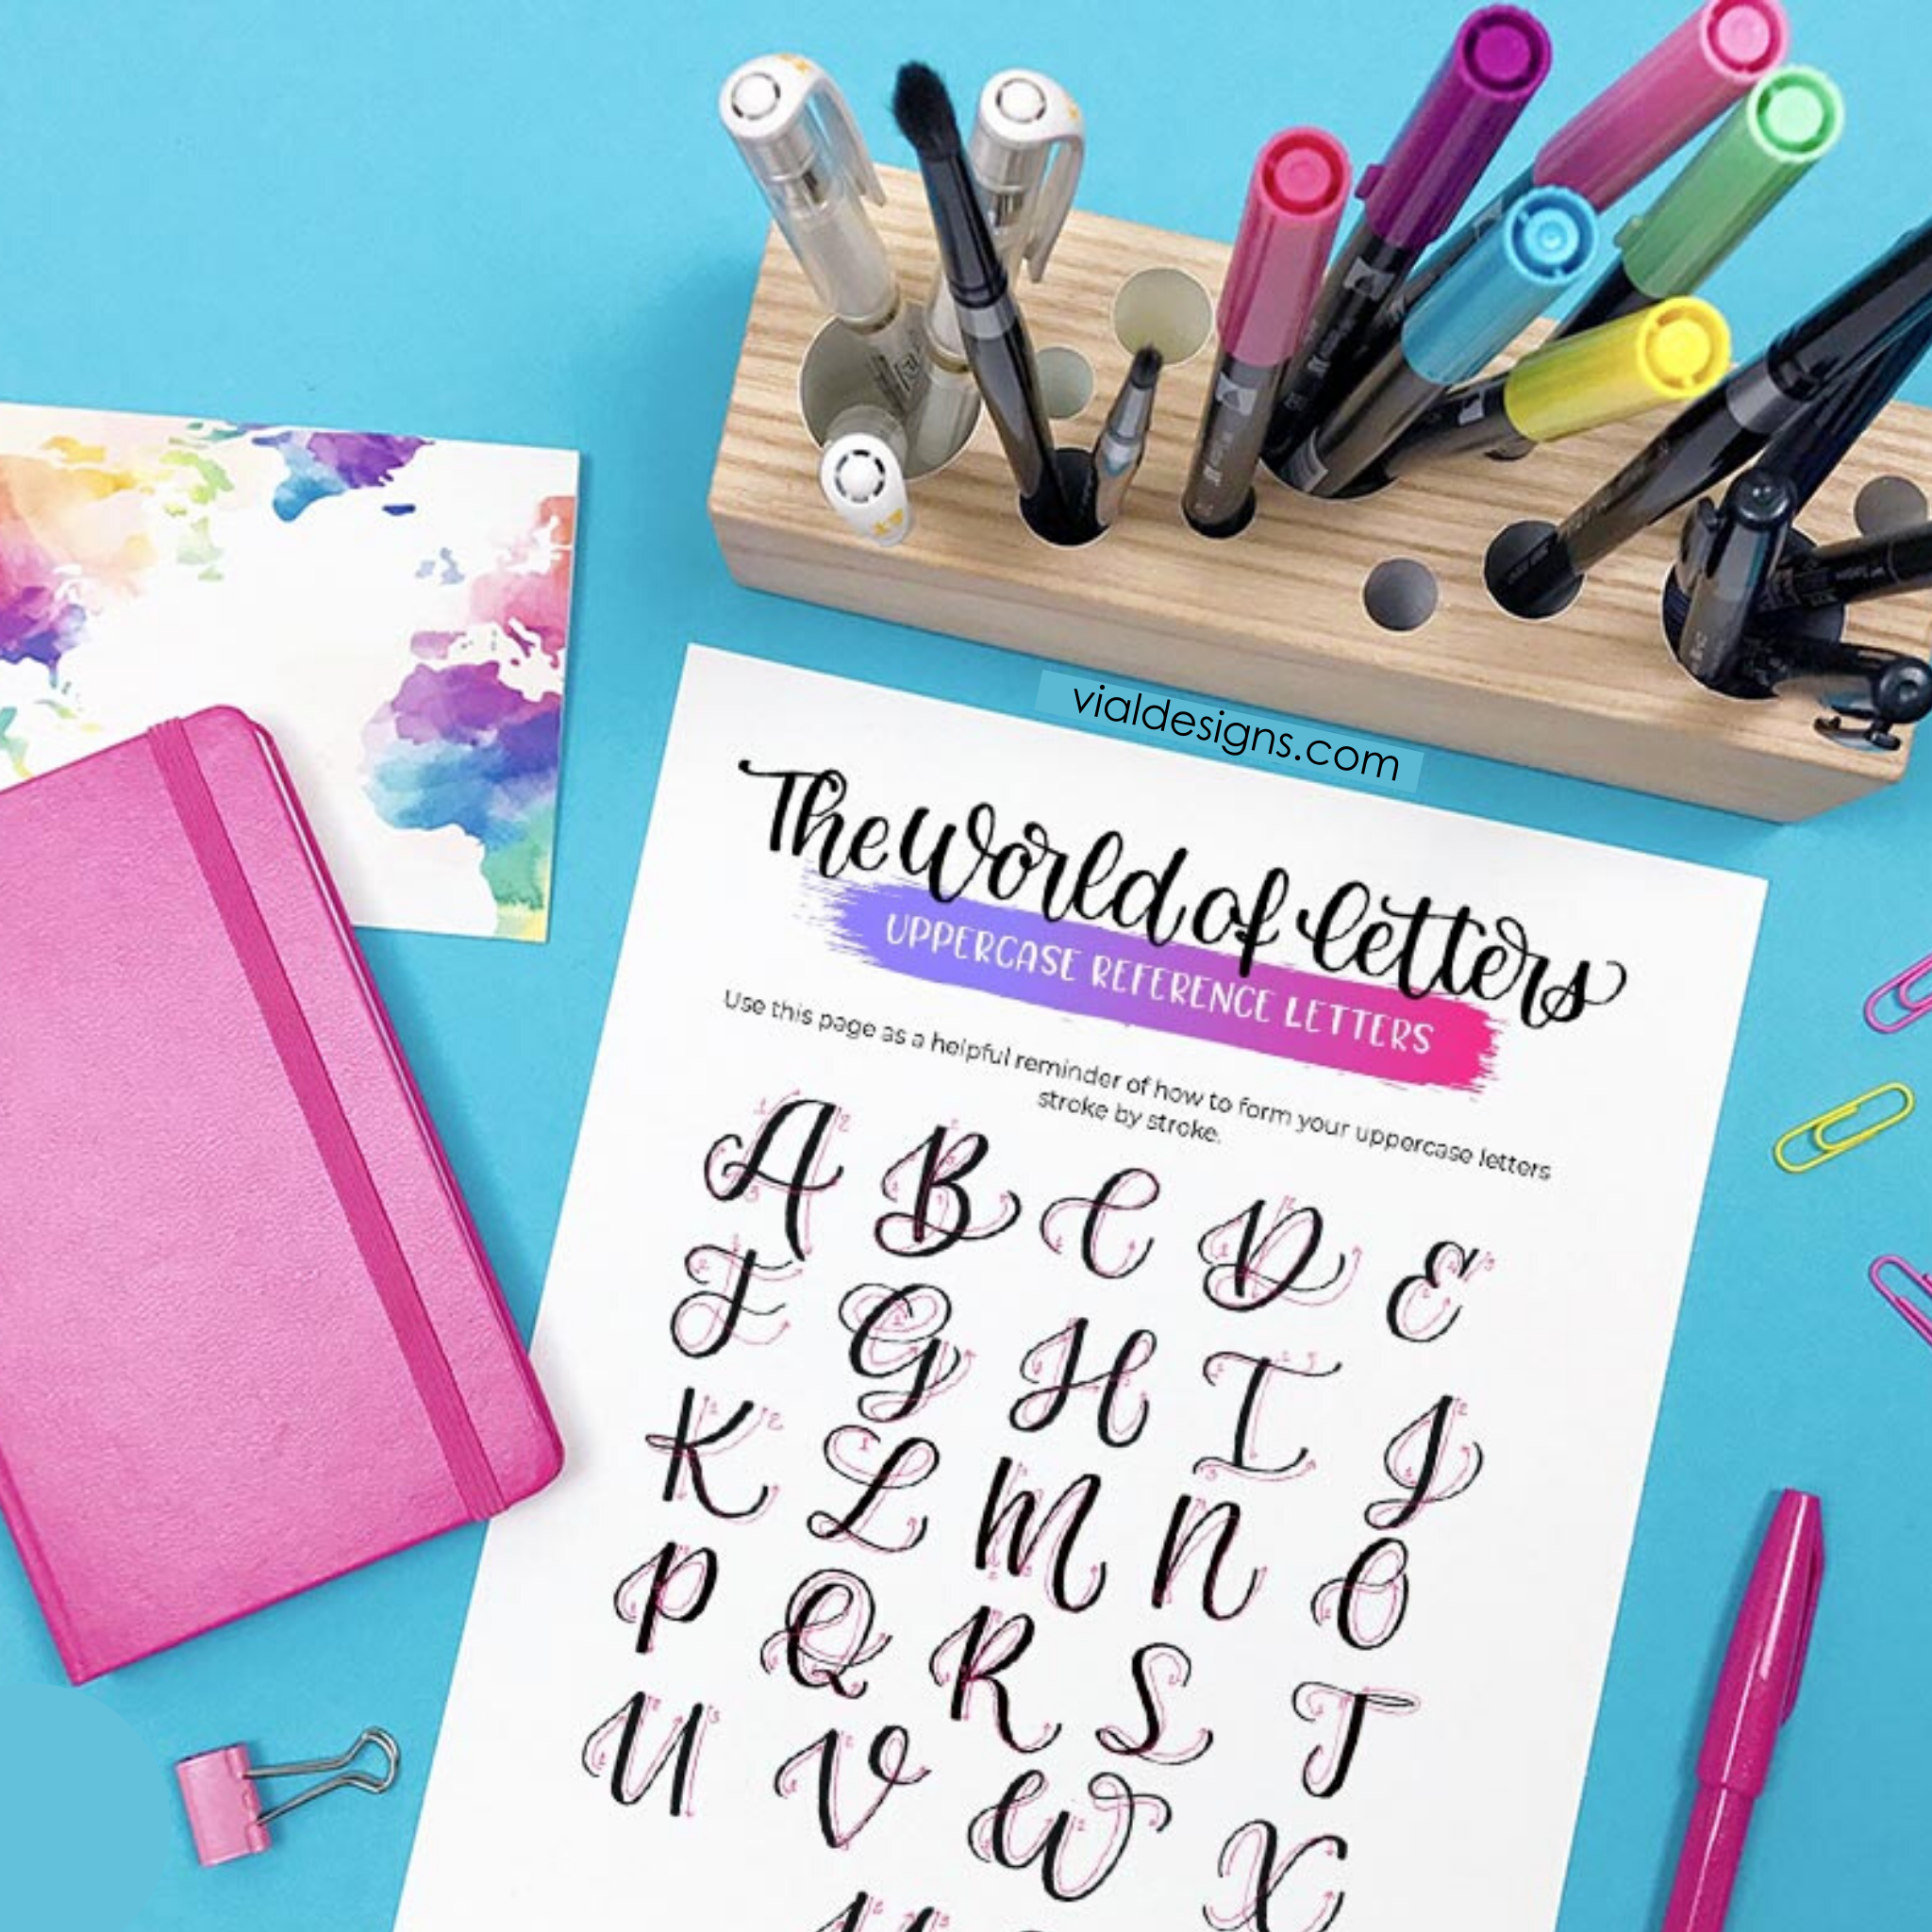 Modern Calligraphy For Beginners. Learn How to Make Beautiful Letters –  Vial Designs